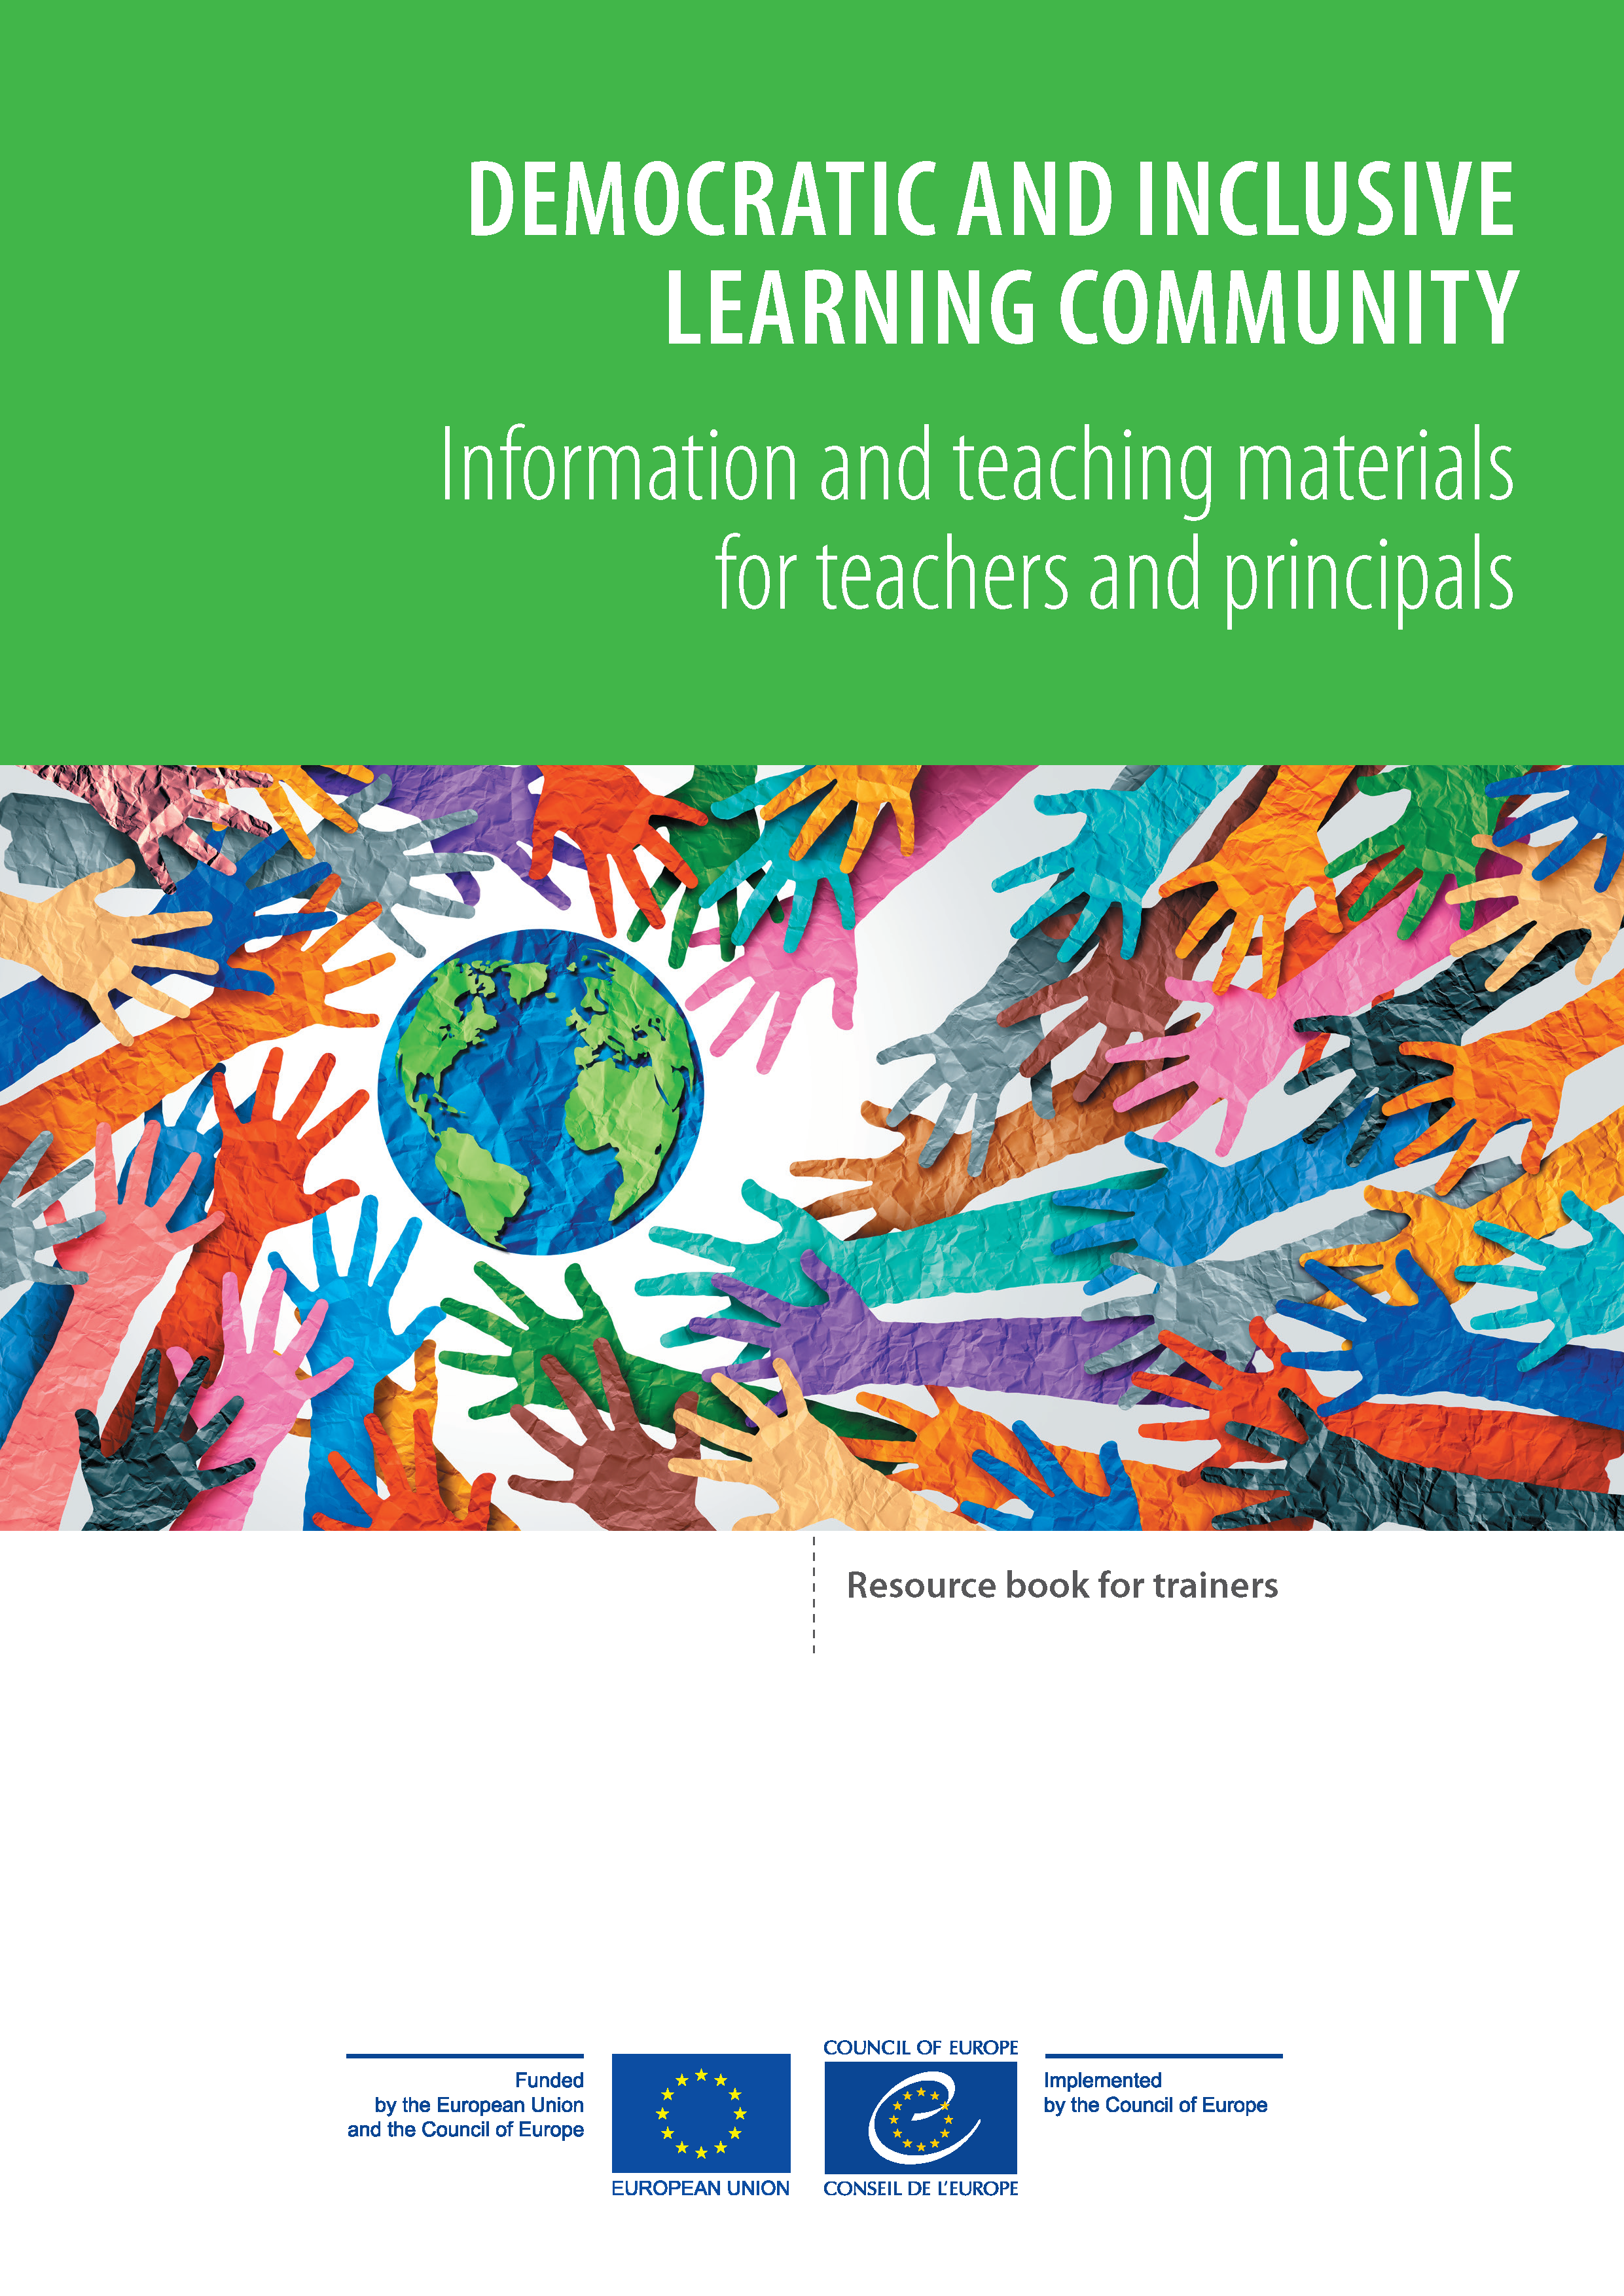 Democratic and Inclusive Learning Community - Information and teaching materials for teachers and principals